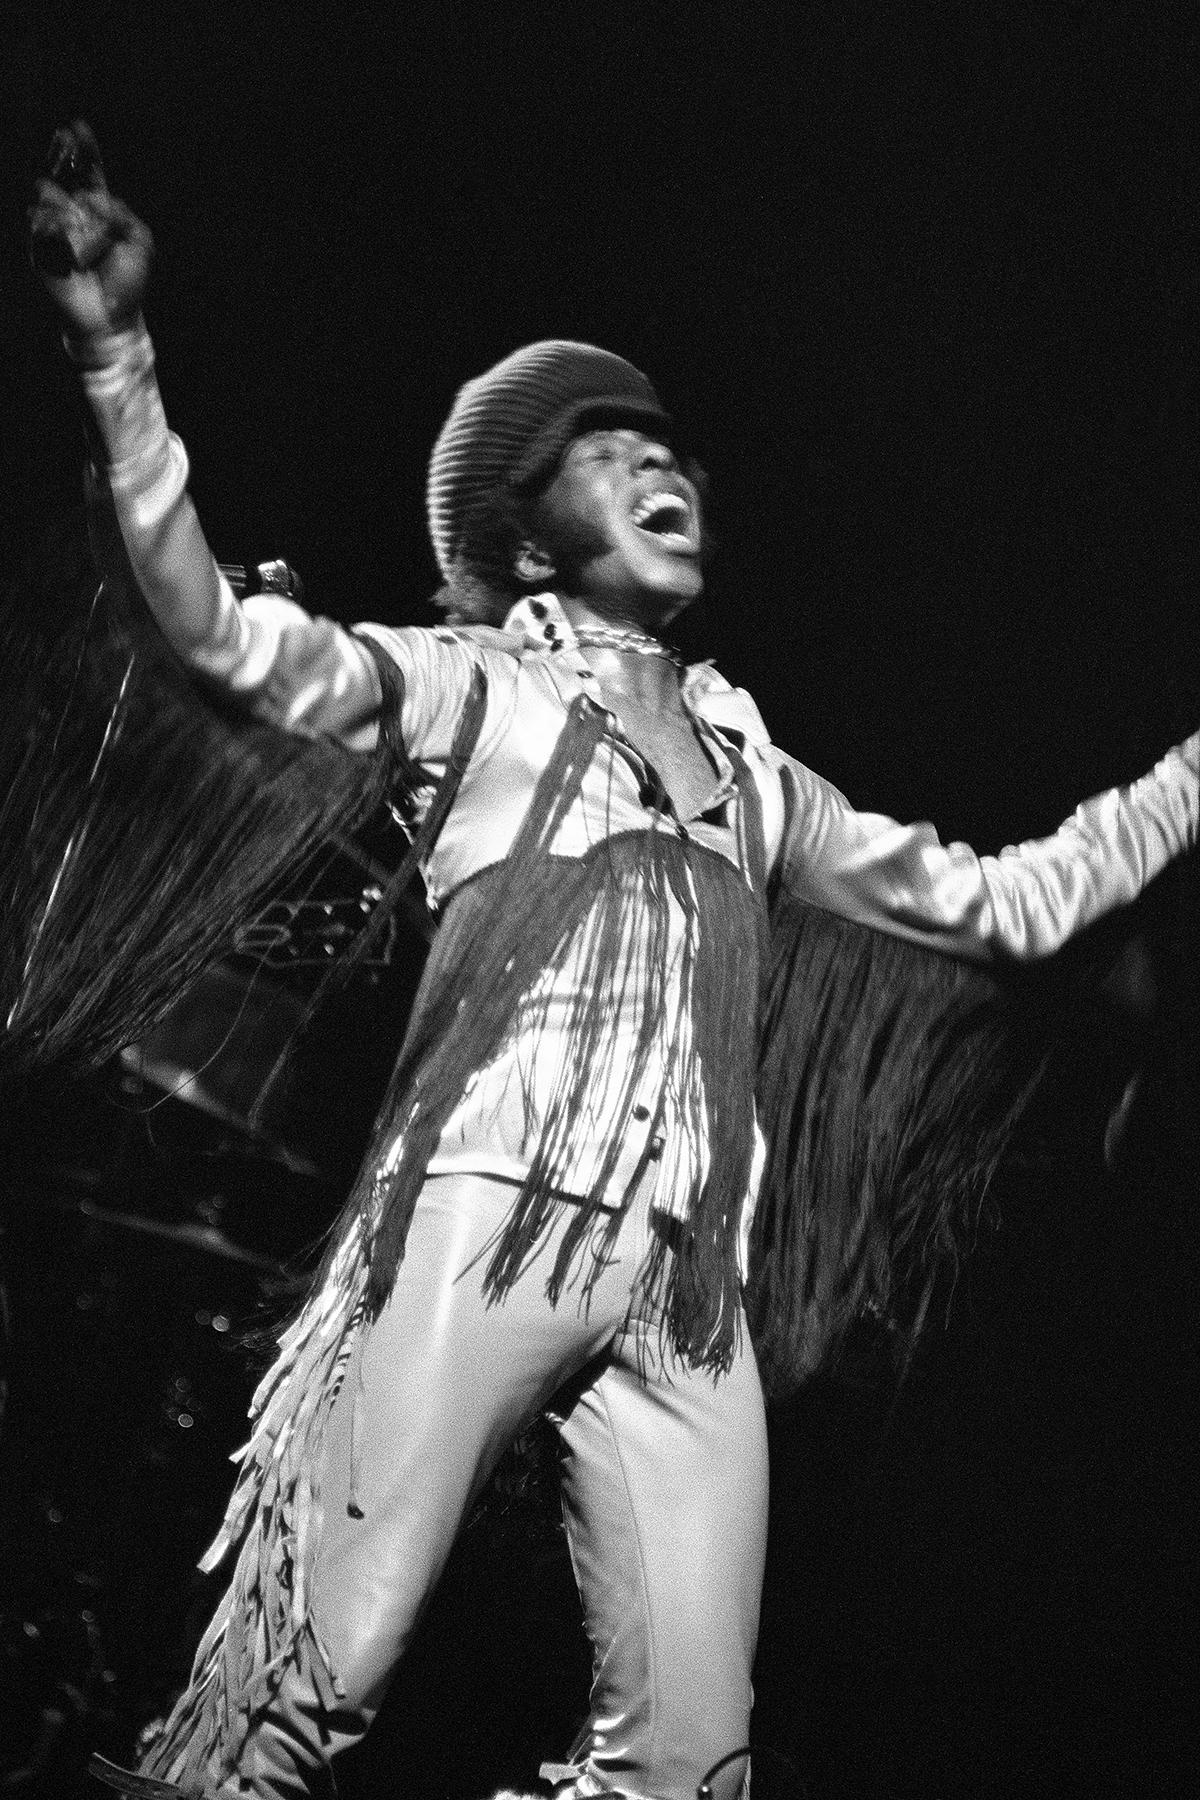 Sly Stone at Soul Together: Sly Stone